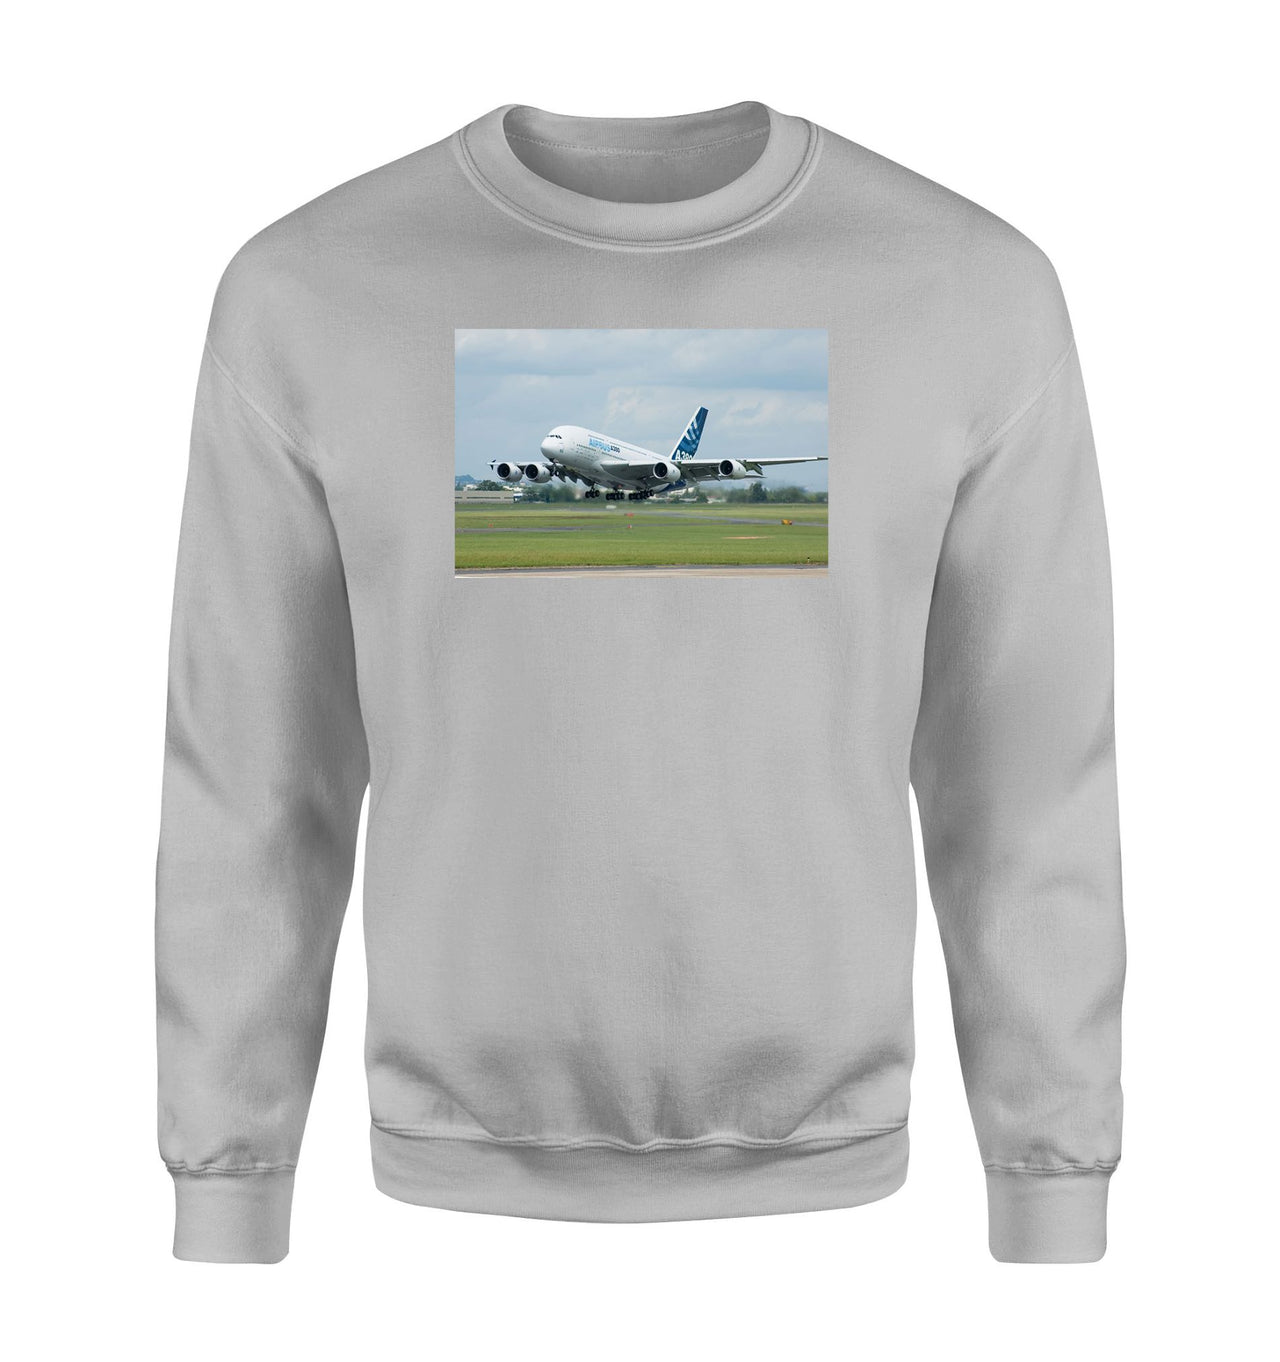 Departing Airbus A380 with Original Livery Designed Sweatshirts